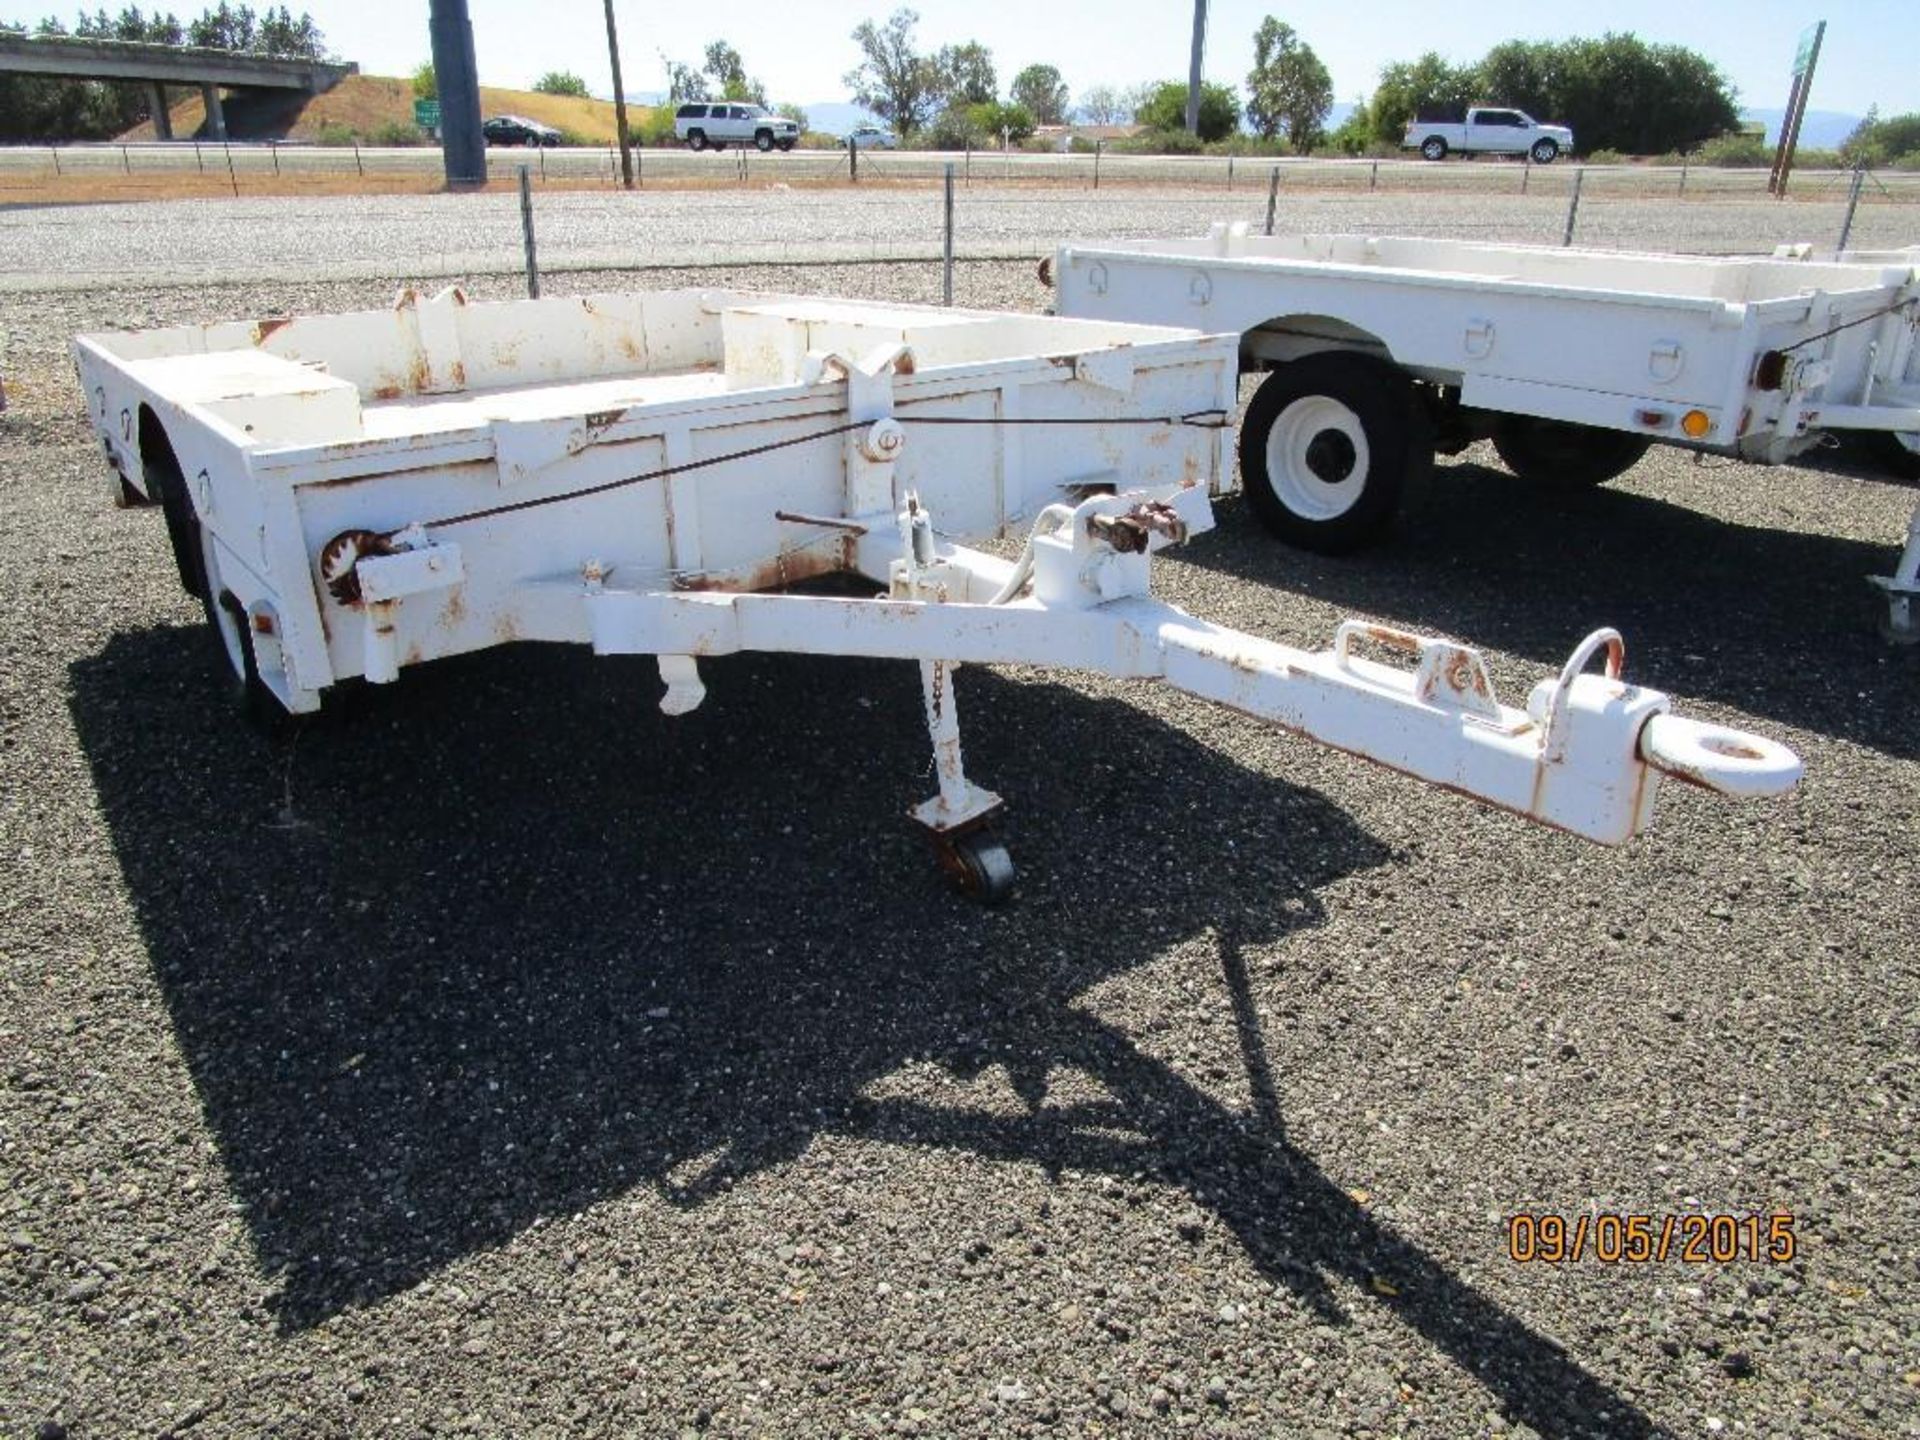 VIN 3139 LIC# 4AN7418 GVWR 9000Lbs Pintle Hitch Air Brakes Ratchet Cable Tie Downs Front and Back - Image 4 of 7